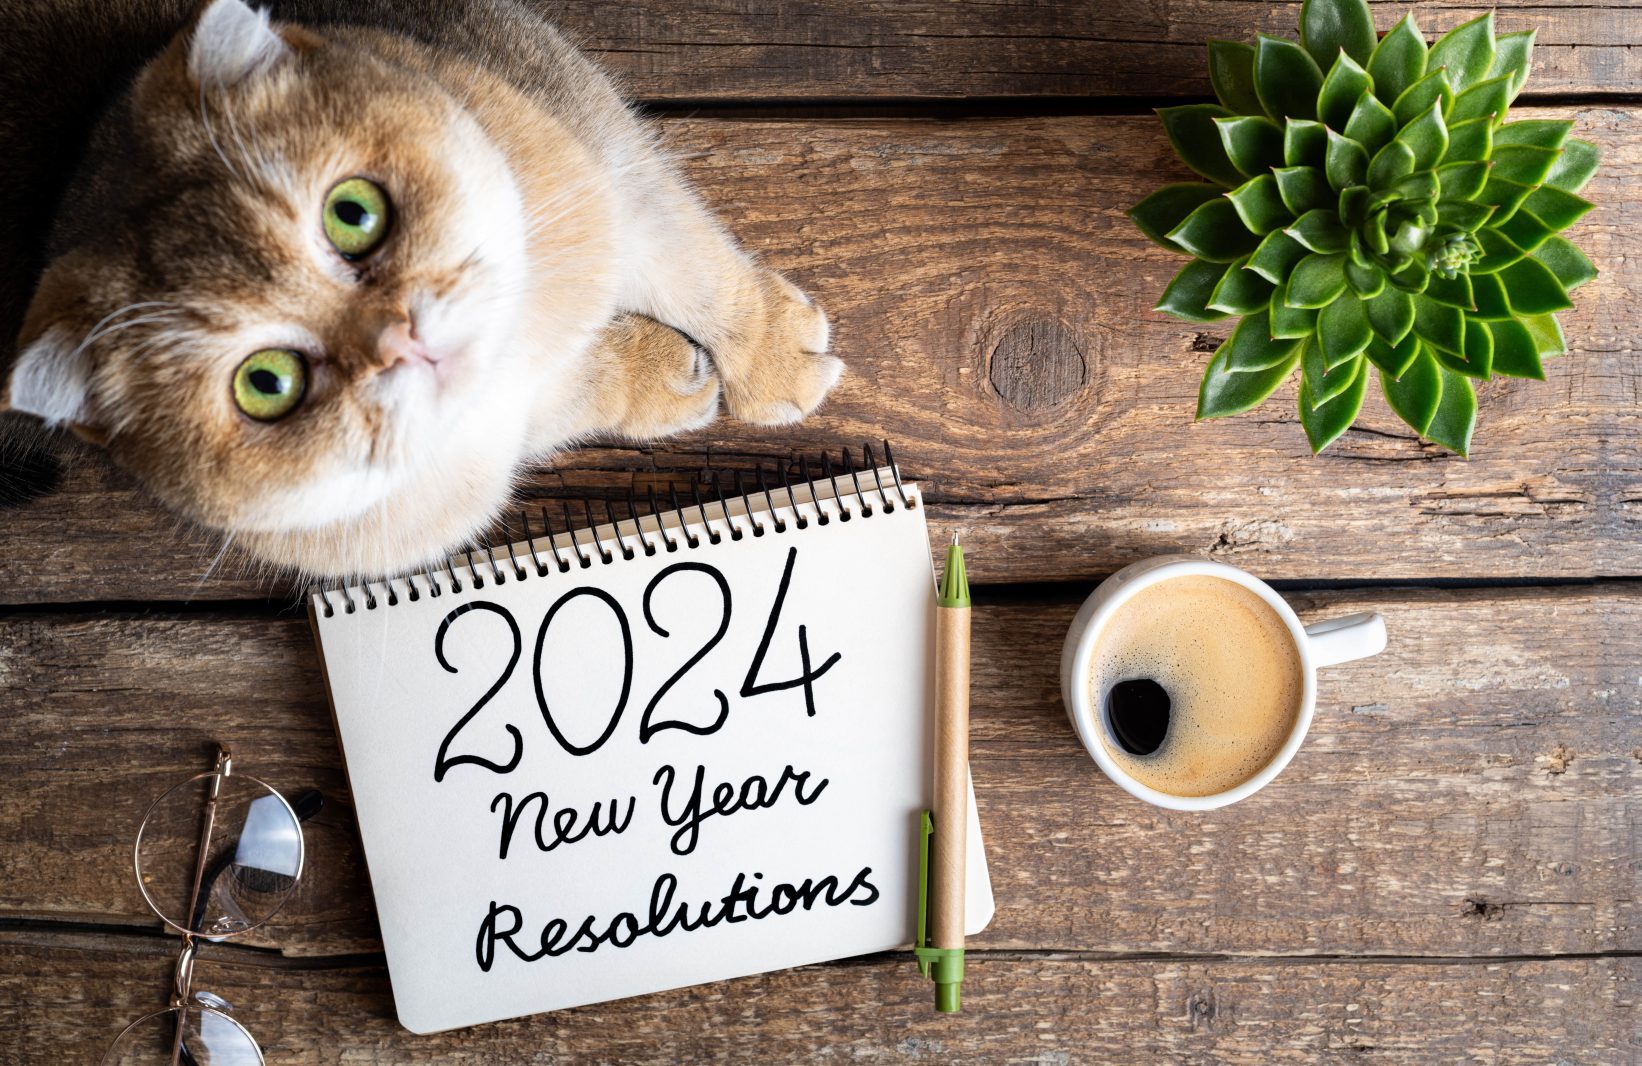 5 Clever New Year’s Resolutions for Pet Owners